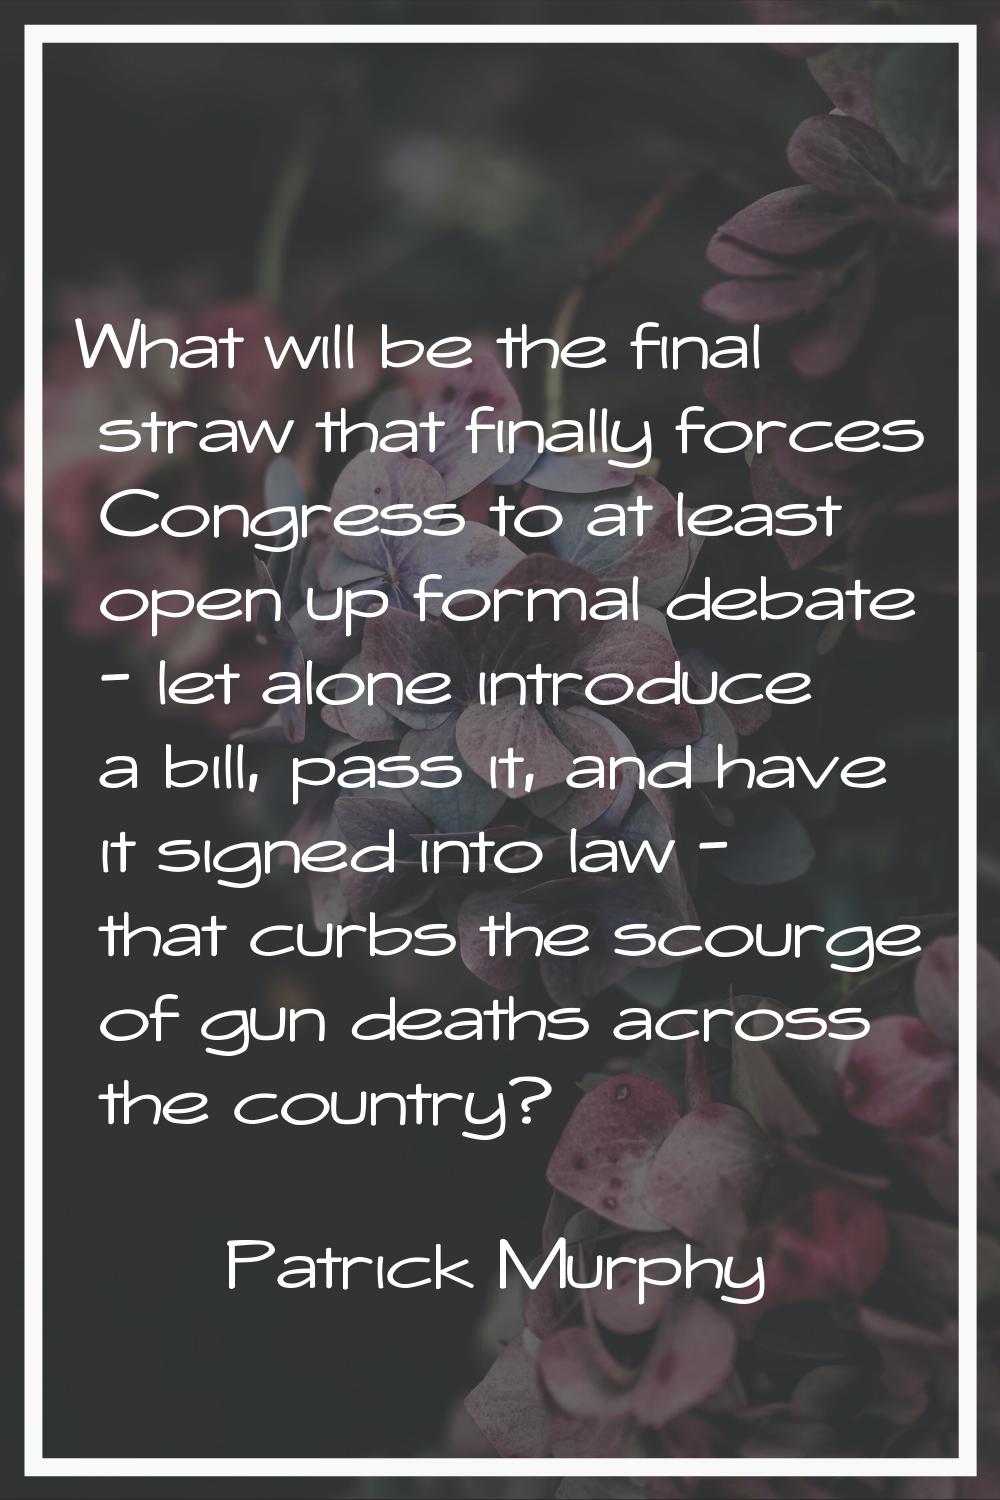 What will be the final straw that finally forces Congress to at least open up formal debate - let a